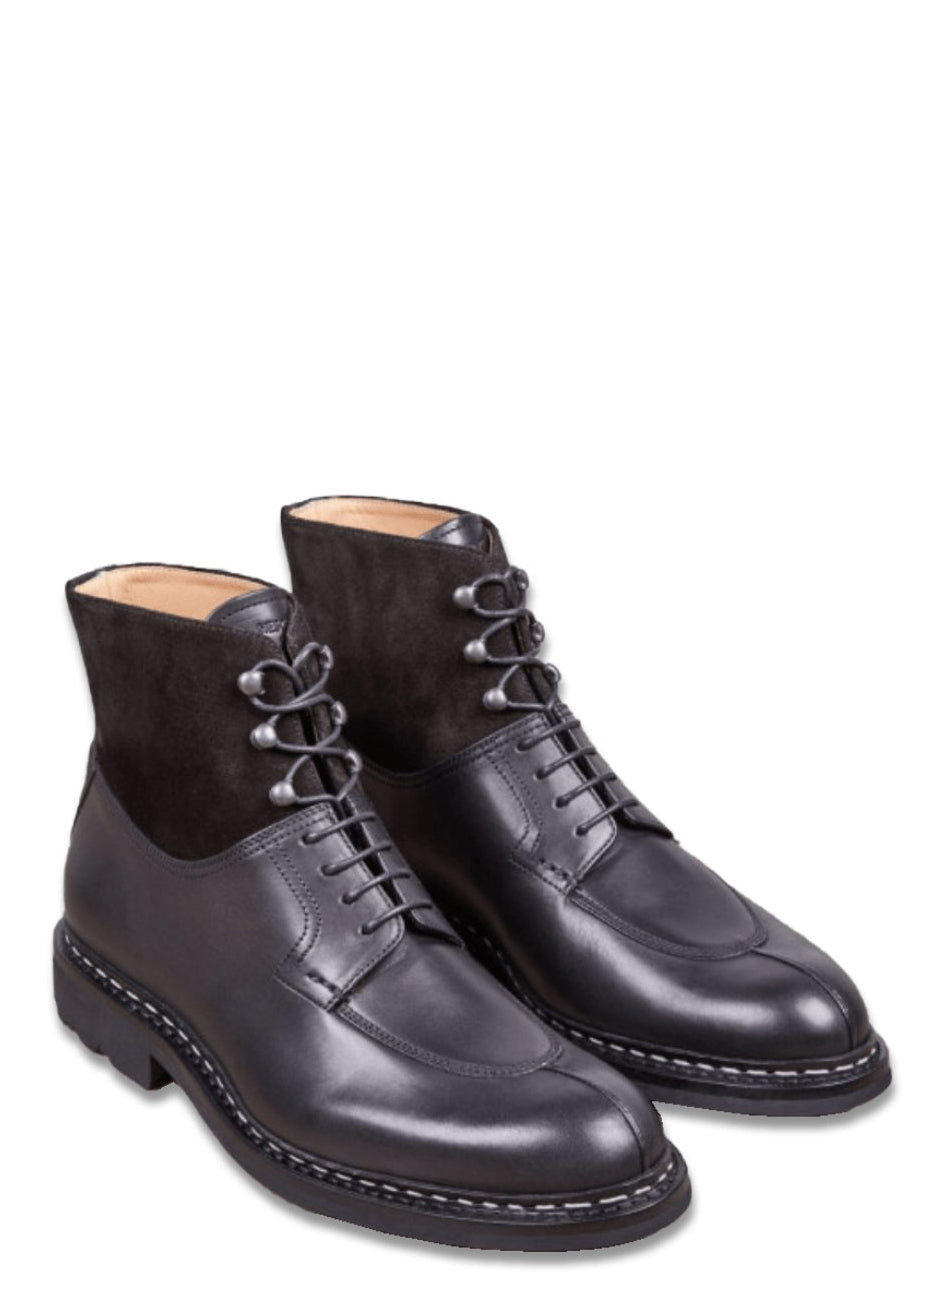 GINKGO | Leather Boot with Suede Collar | Black